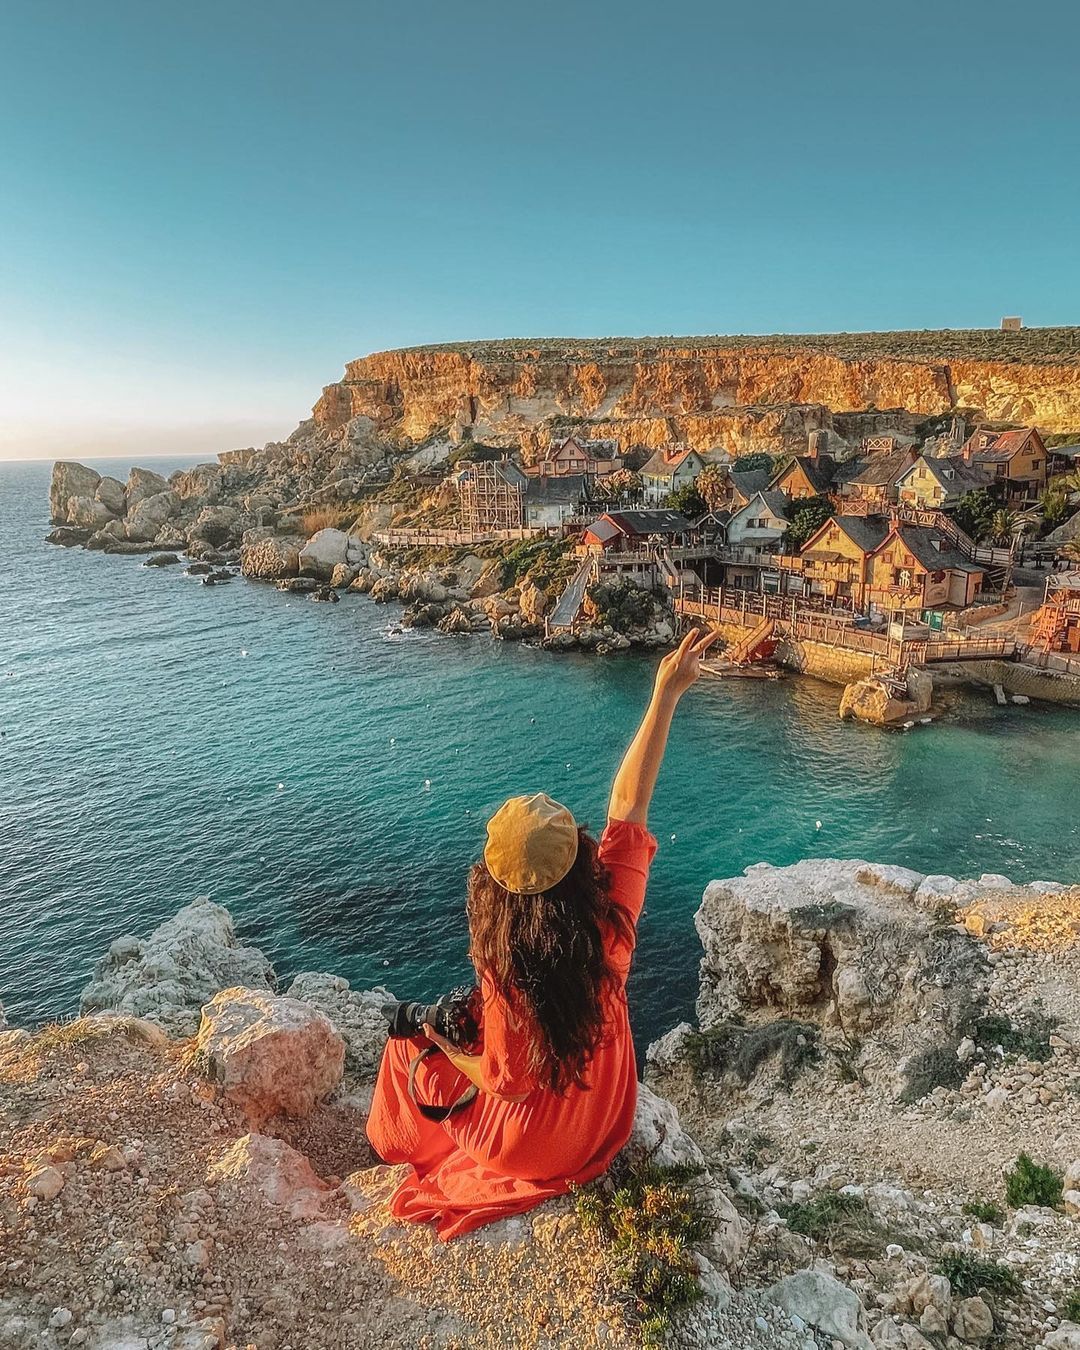 Popeye Village - Malta: 10 Most Frequently Asked Questions